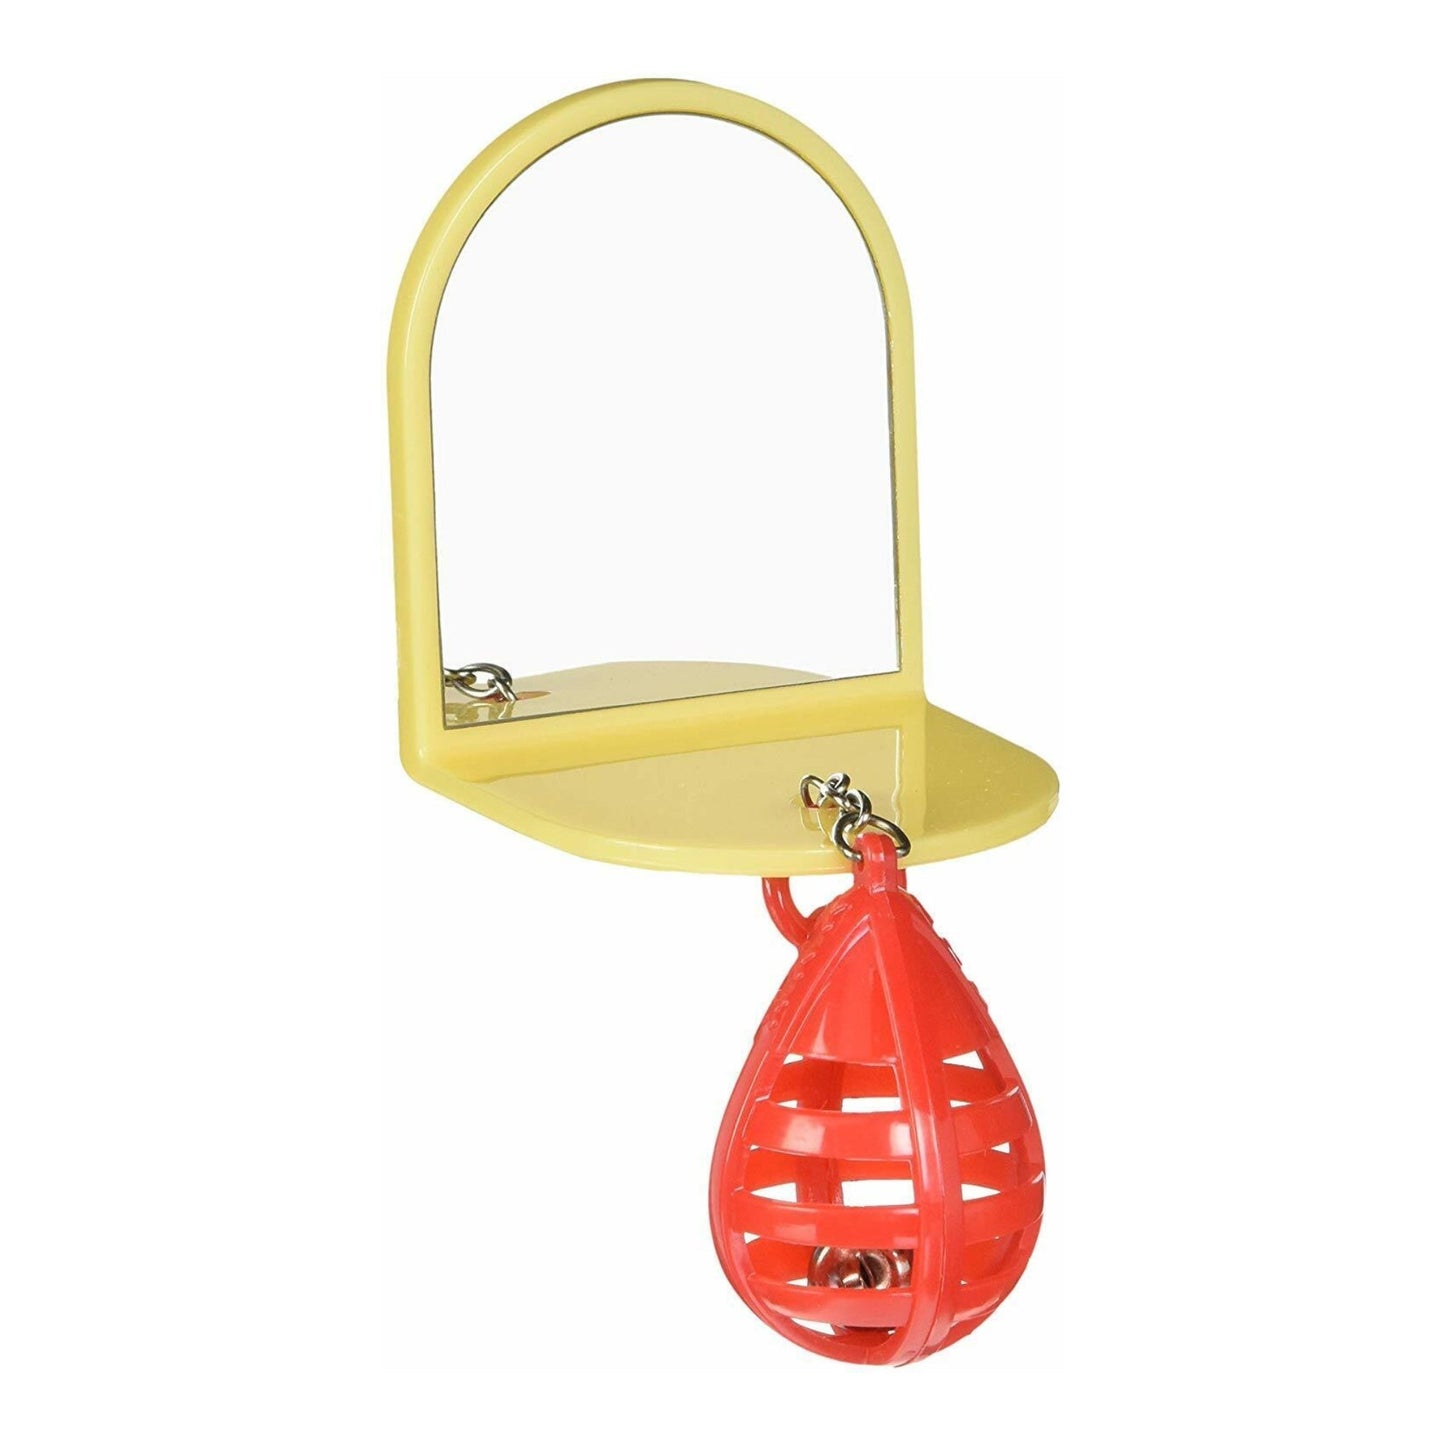 JW Pet ActiviToy Punching Bag Bird Toy Multi-Color 1ea/SM/MD